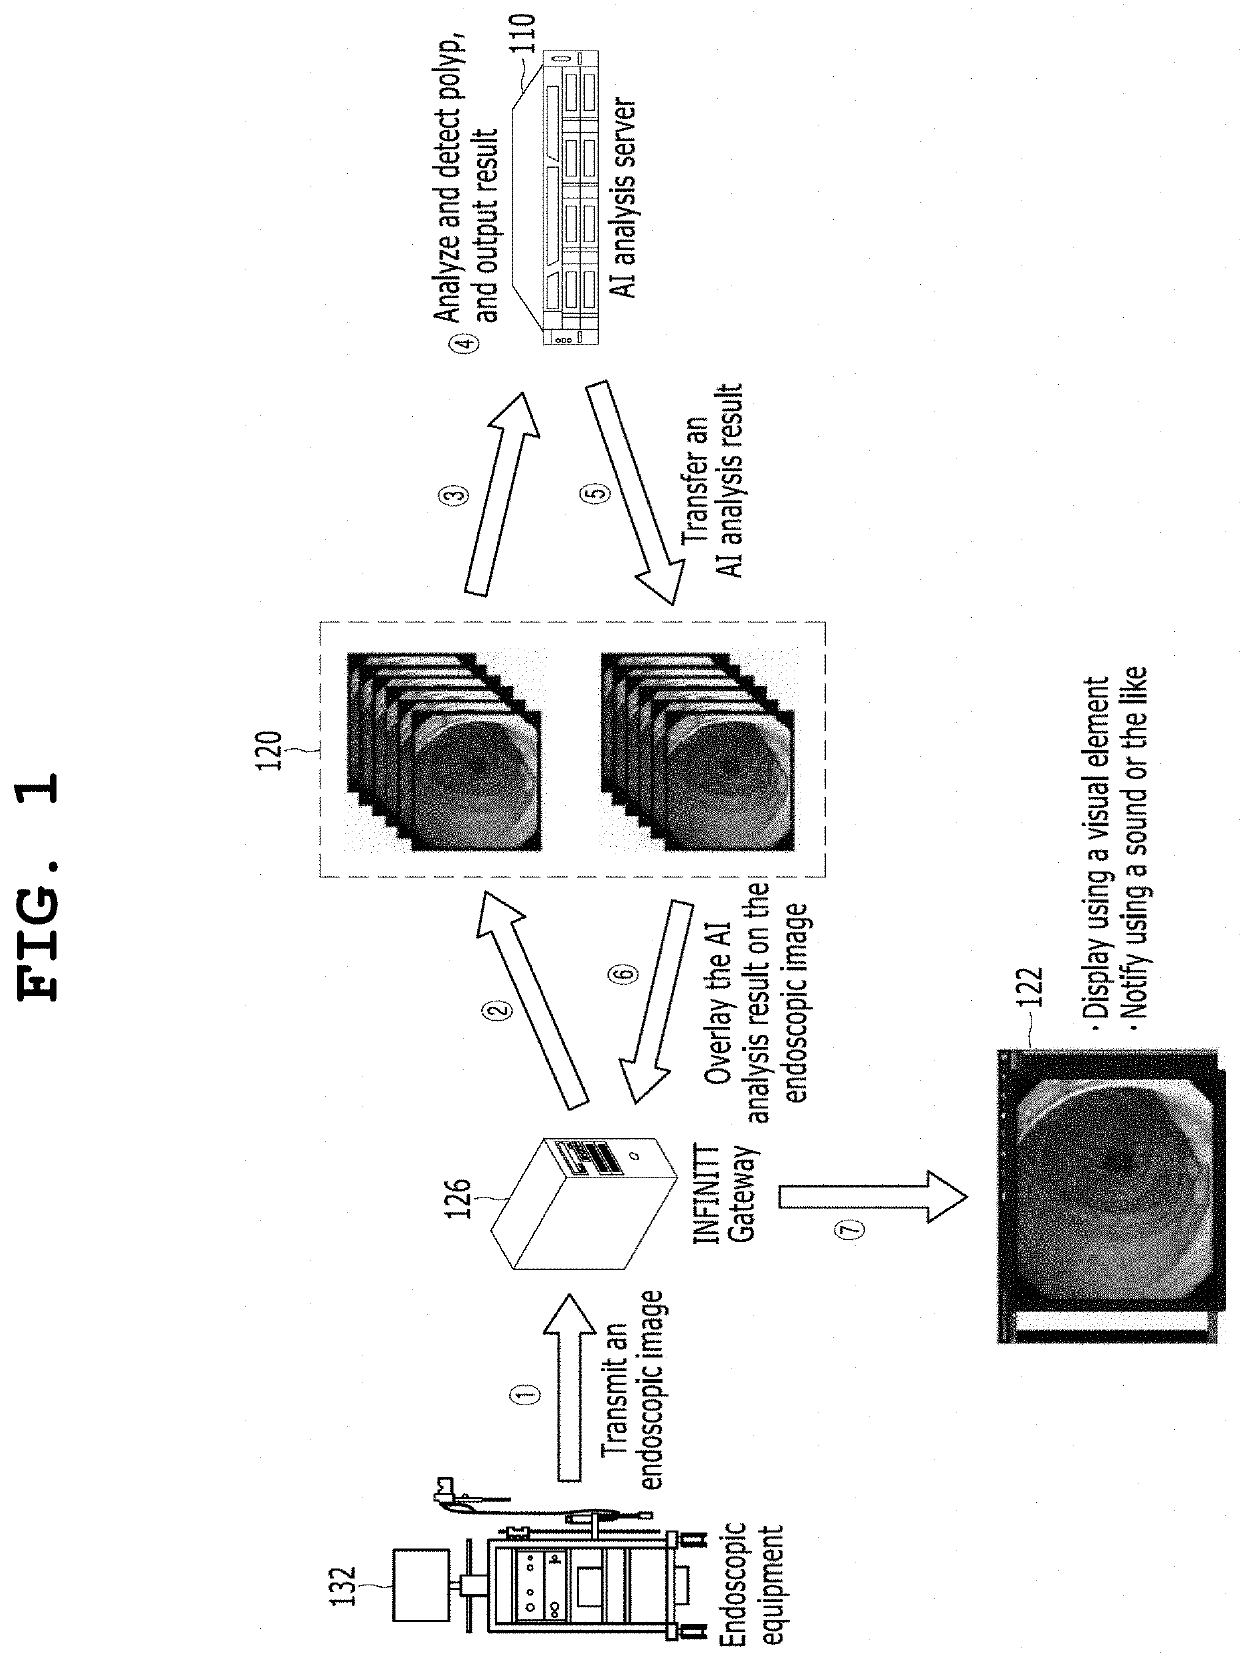 Artificial intelligence-based colonoscopic image diagnosis assisting system and method